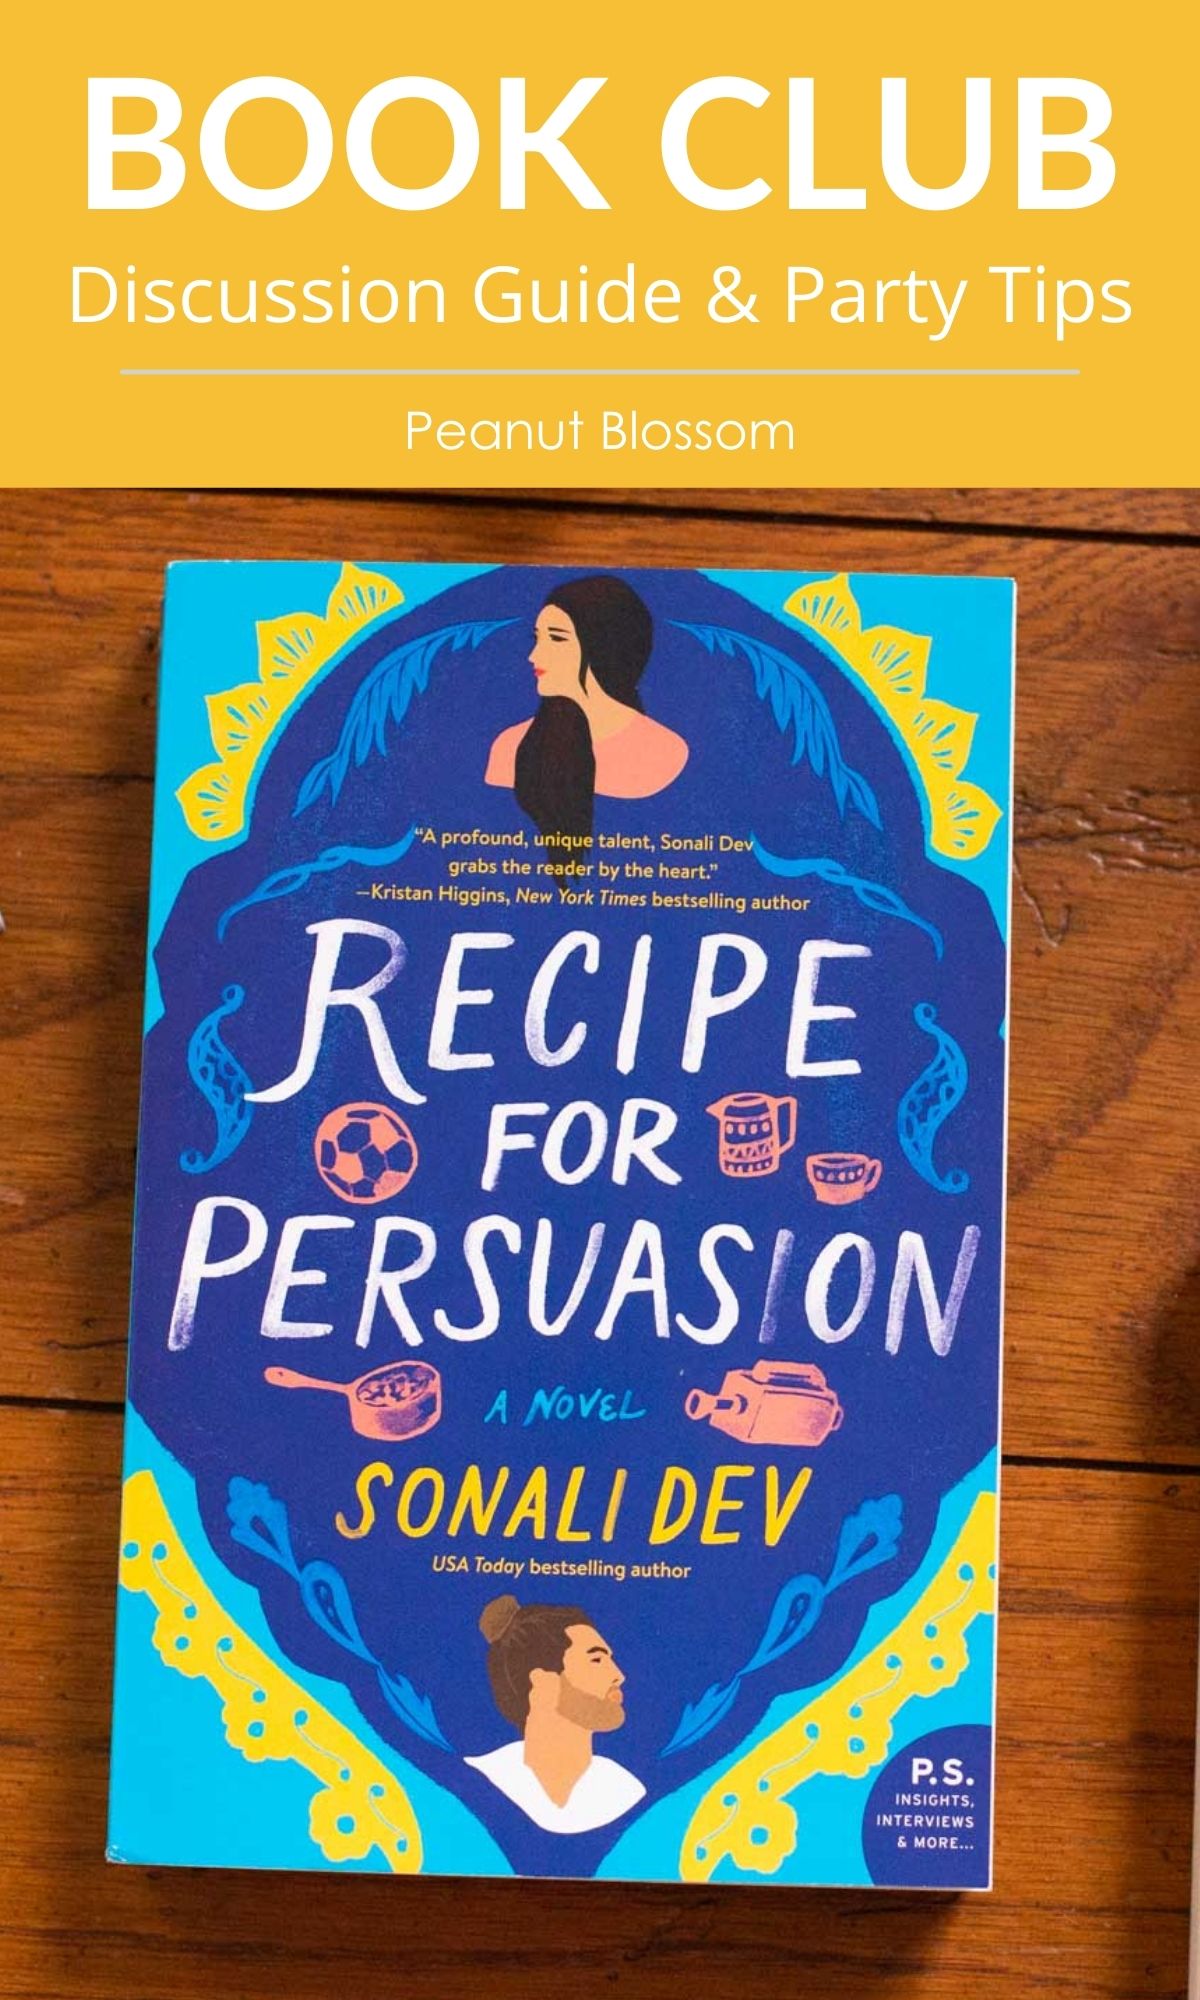 A copy of the book Recipe for Persuasion by Sonali Dev sits on a table.